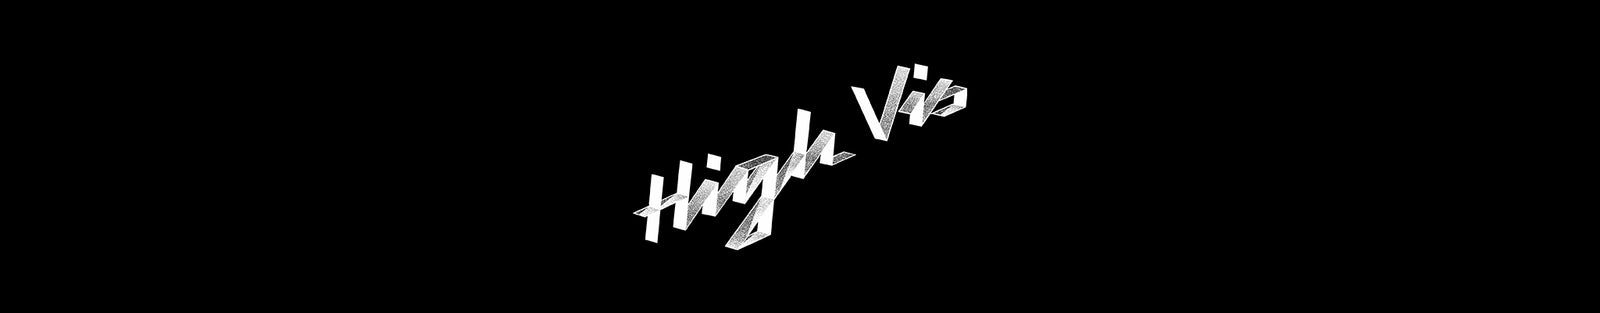 HIGH VIS - Official Merch Store - Evil Greed